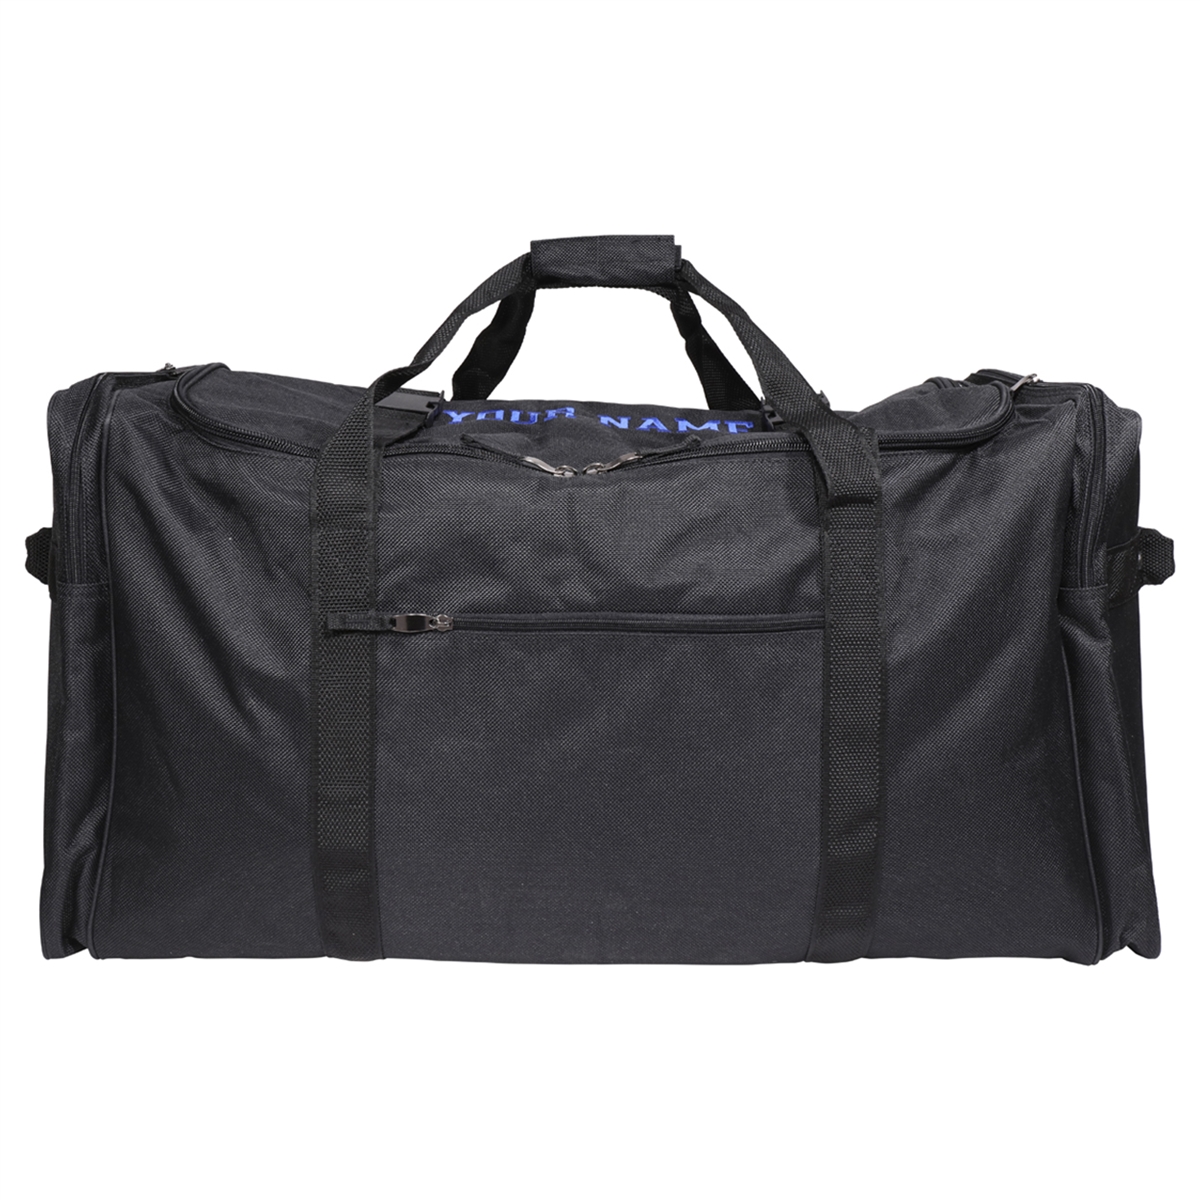 Campus Tote Holdall Guy Bags BESBOMIG Camp Overnight Cargo Duffel Bag For Dance